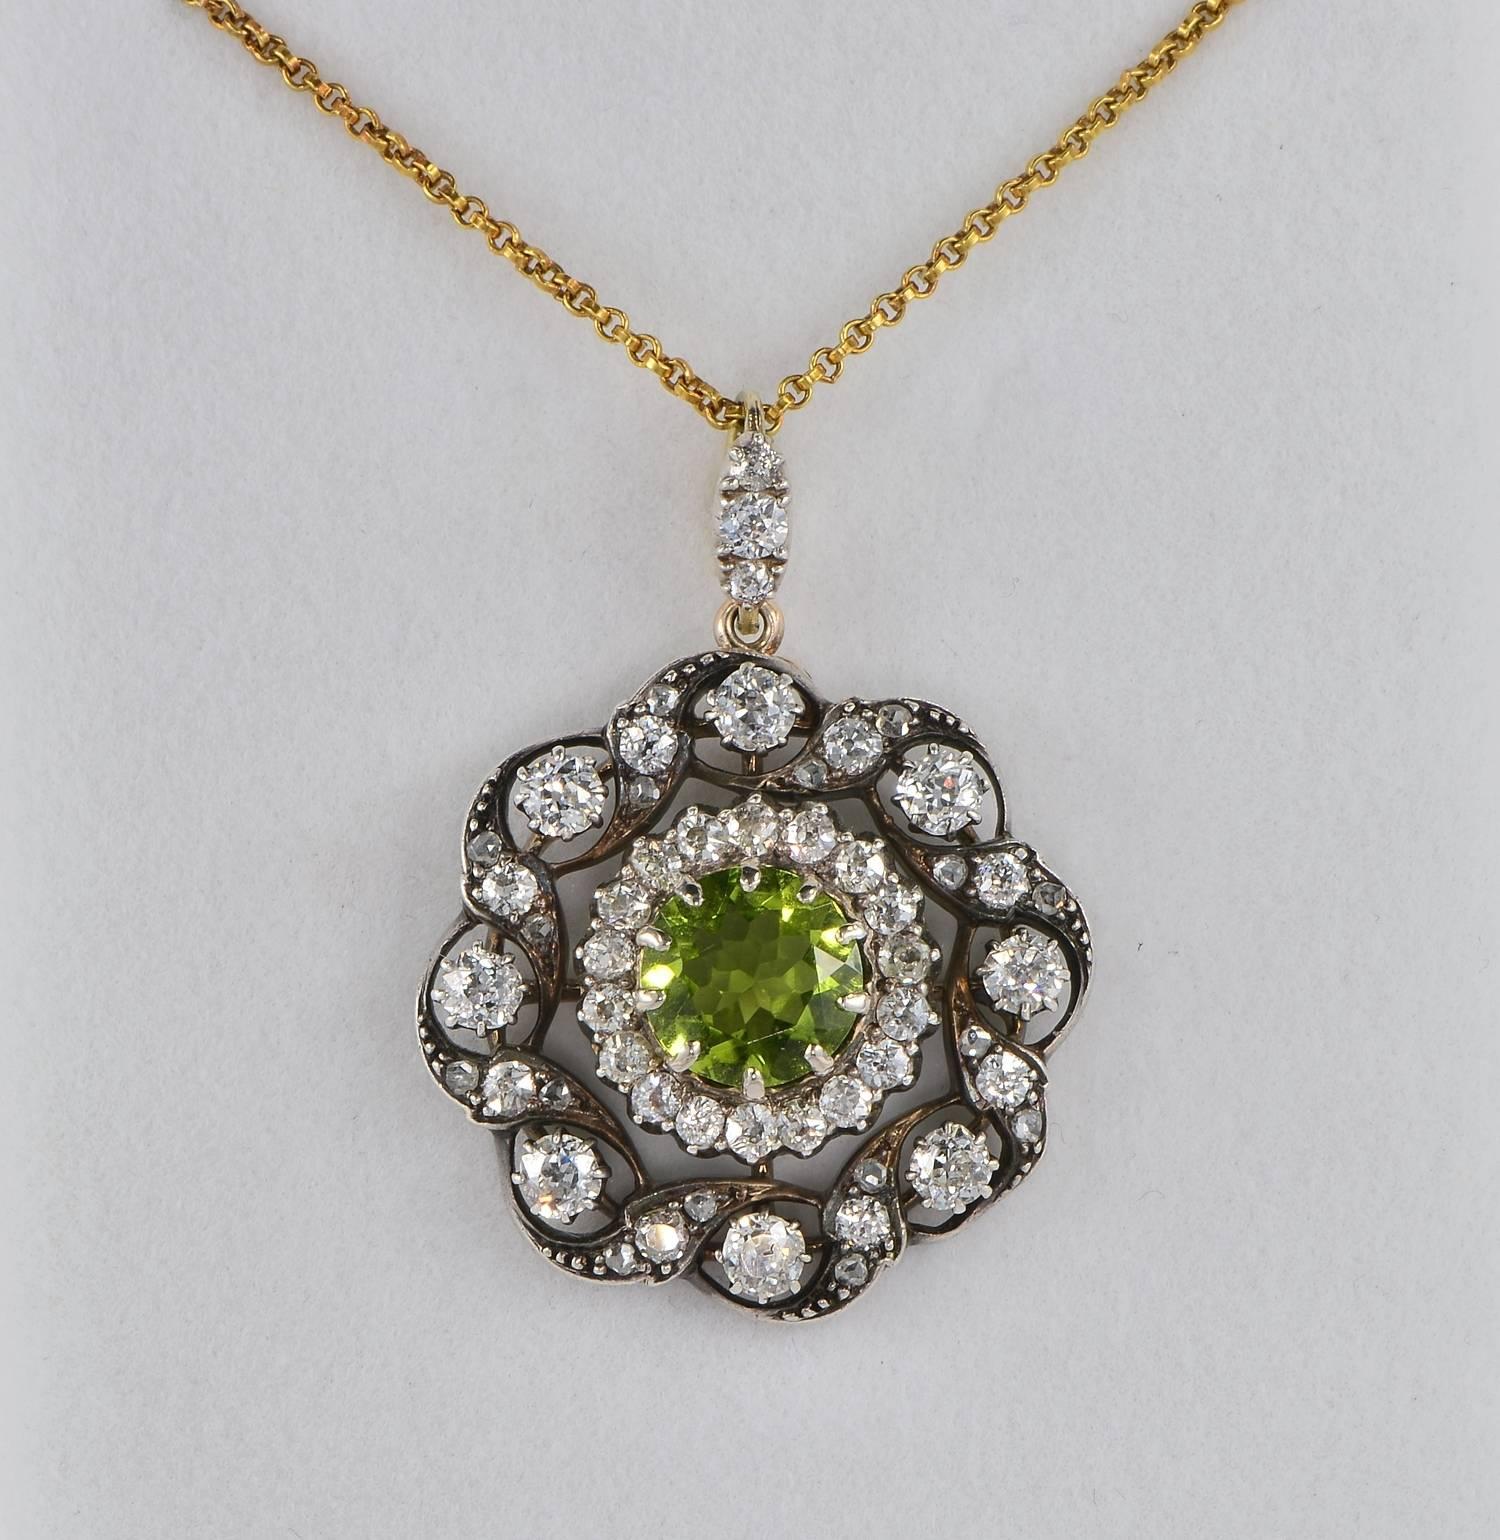 Authentic Victorian 1870 ca.

Beautiful display of old mine cut Diamonds in combination to a vibrant Natural Peridot modelled as a large flower of remarkable glistening sparkle
Finest Victorian workmanship of solid 18 Kt gold with silver portions -